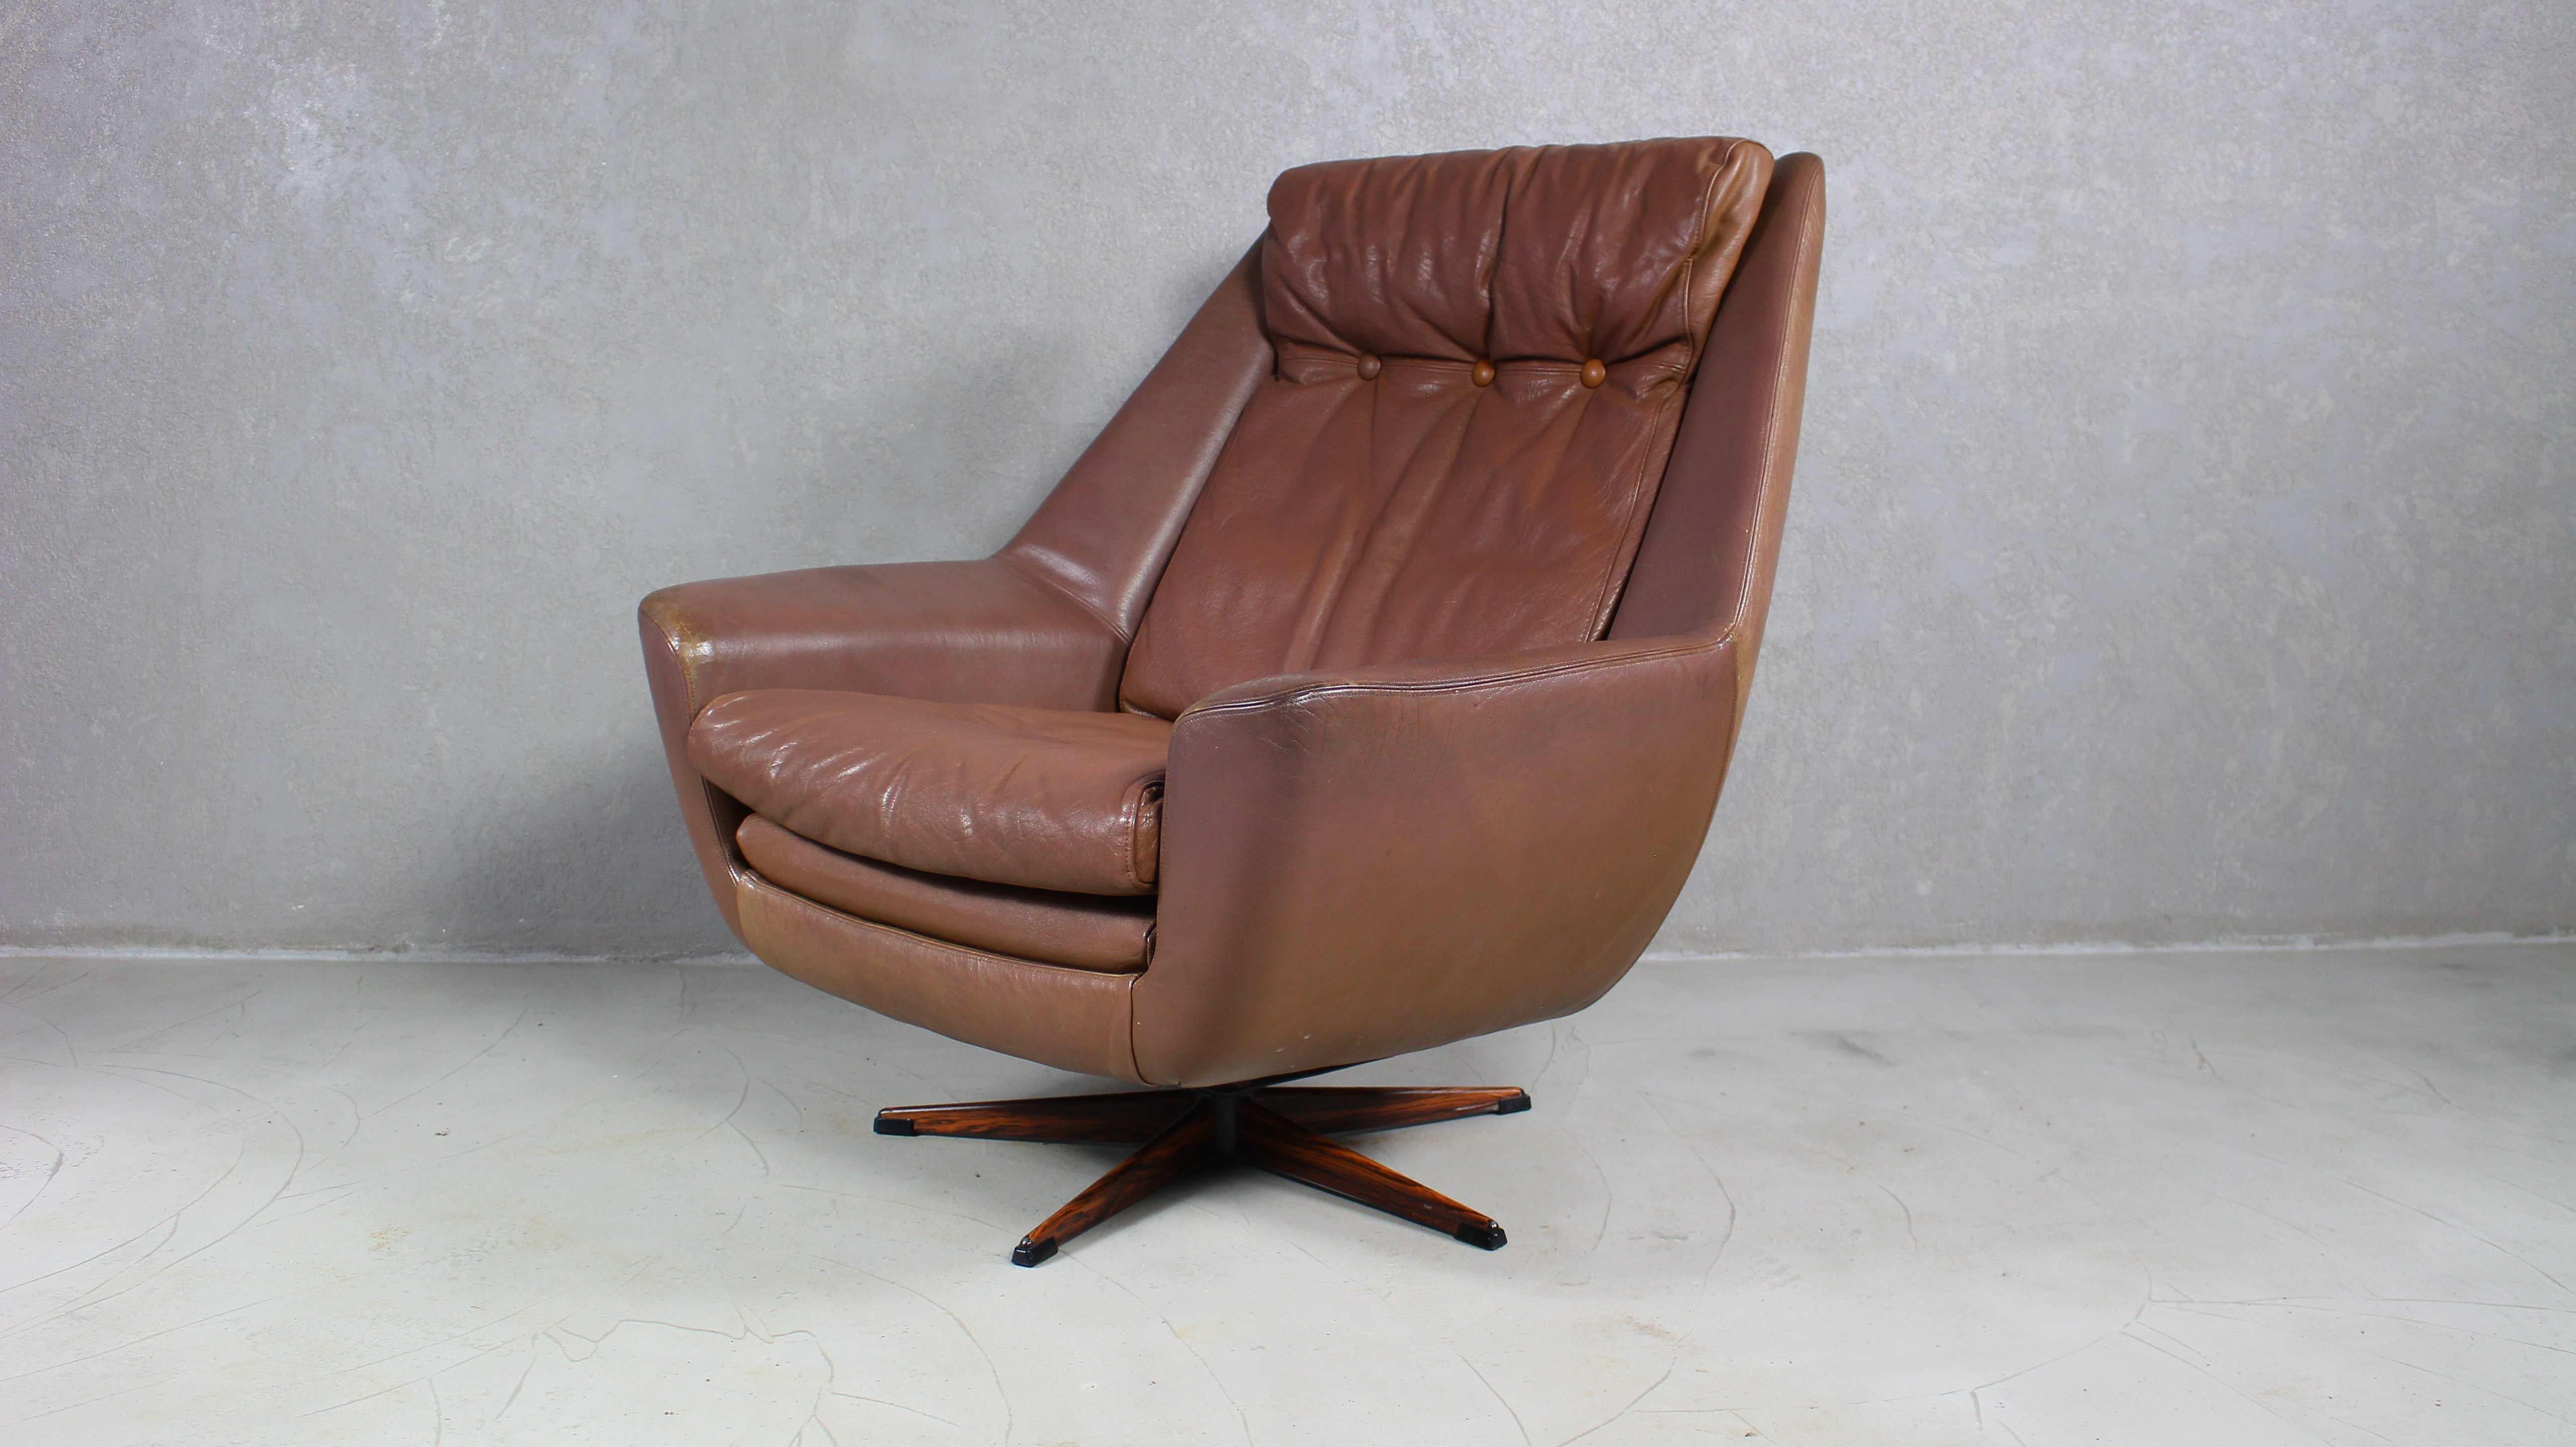 Made in denmark 1960s, manufactured by erhardsen & andersen,
Stunning retro Mid-Century Modern lounge chair.
Upholstered in soft brown leather, with loose cushions on the seat and backrest,
Standing on a five star swivel base. 
Price for 1